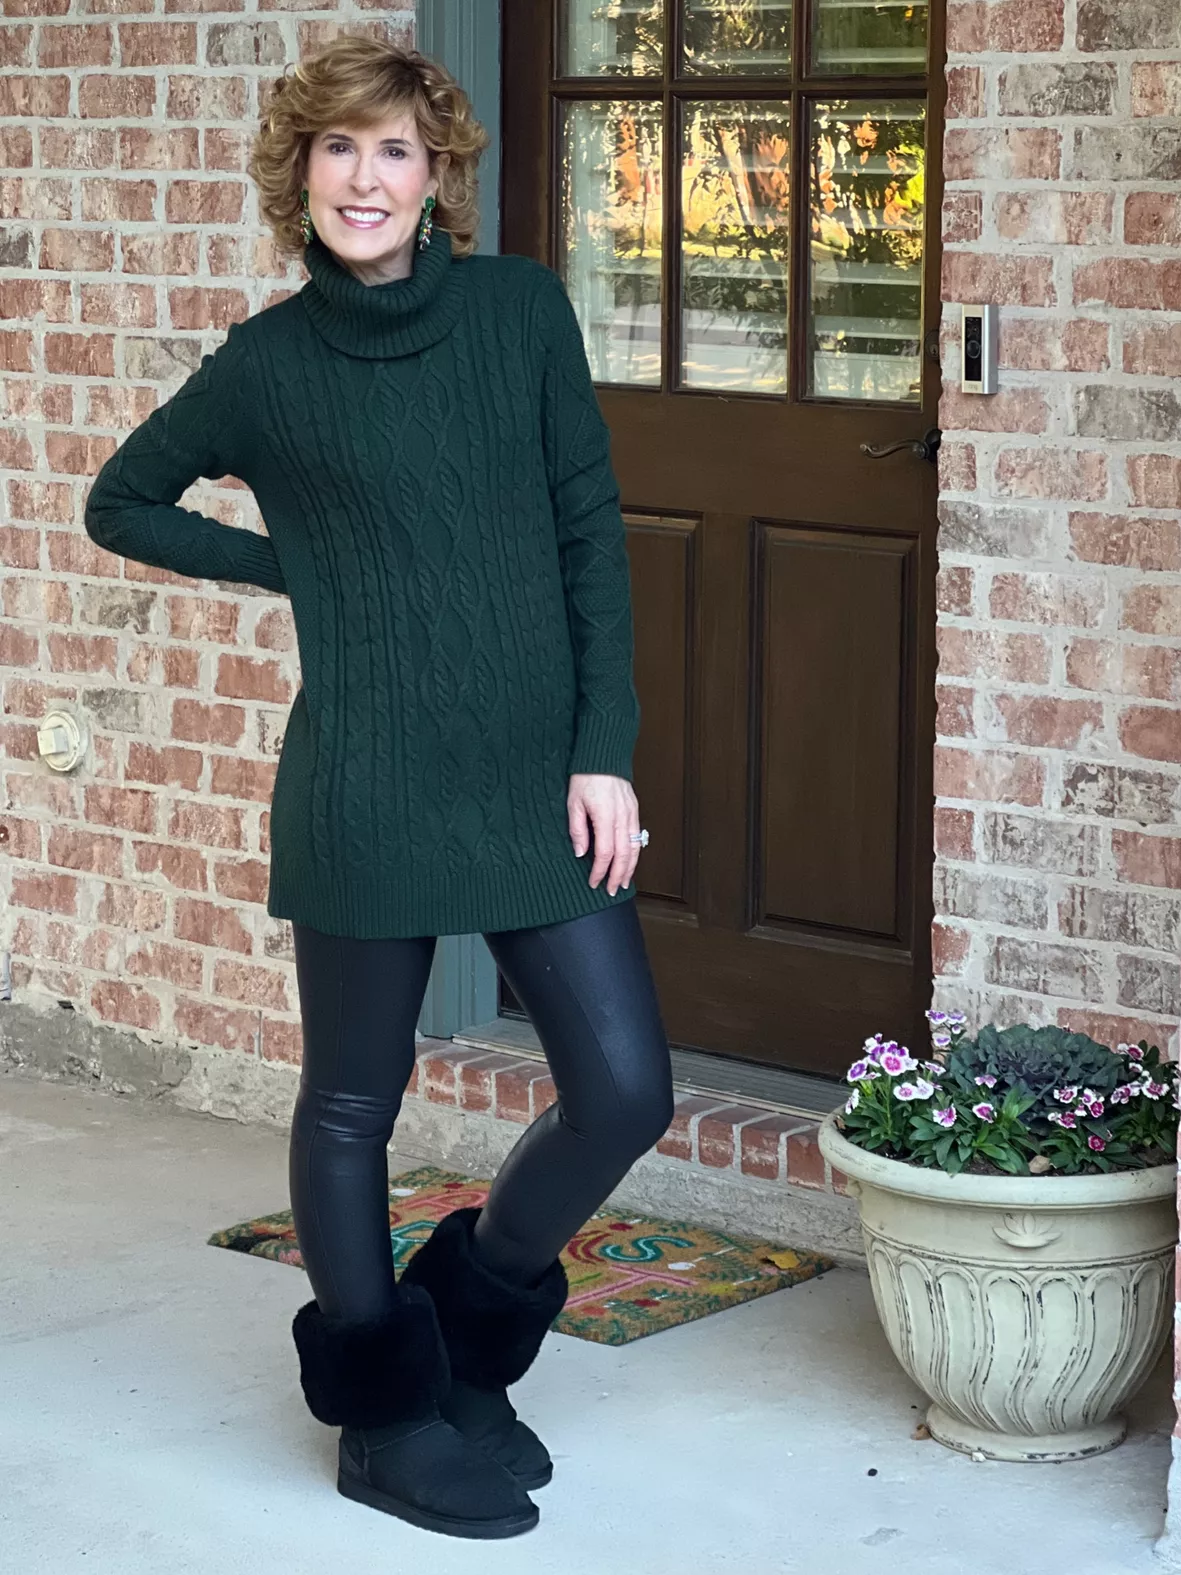 Cozy Holiday: Spanx Leggings + Ivory Cable Knit.